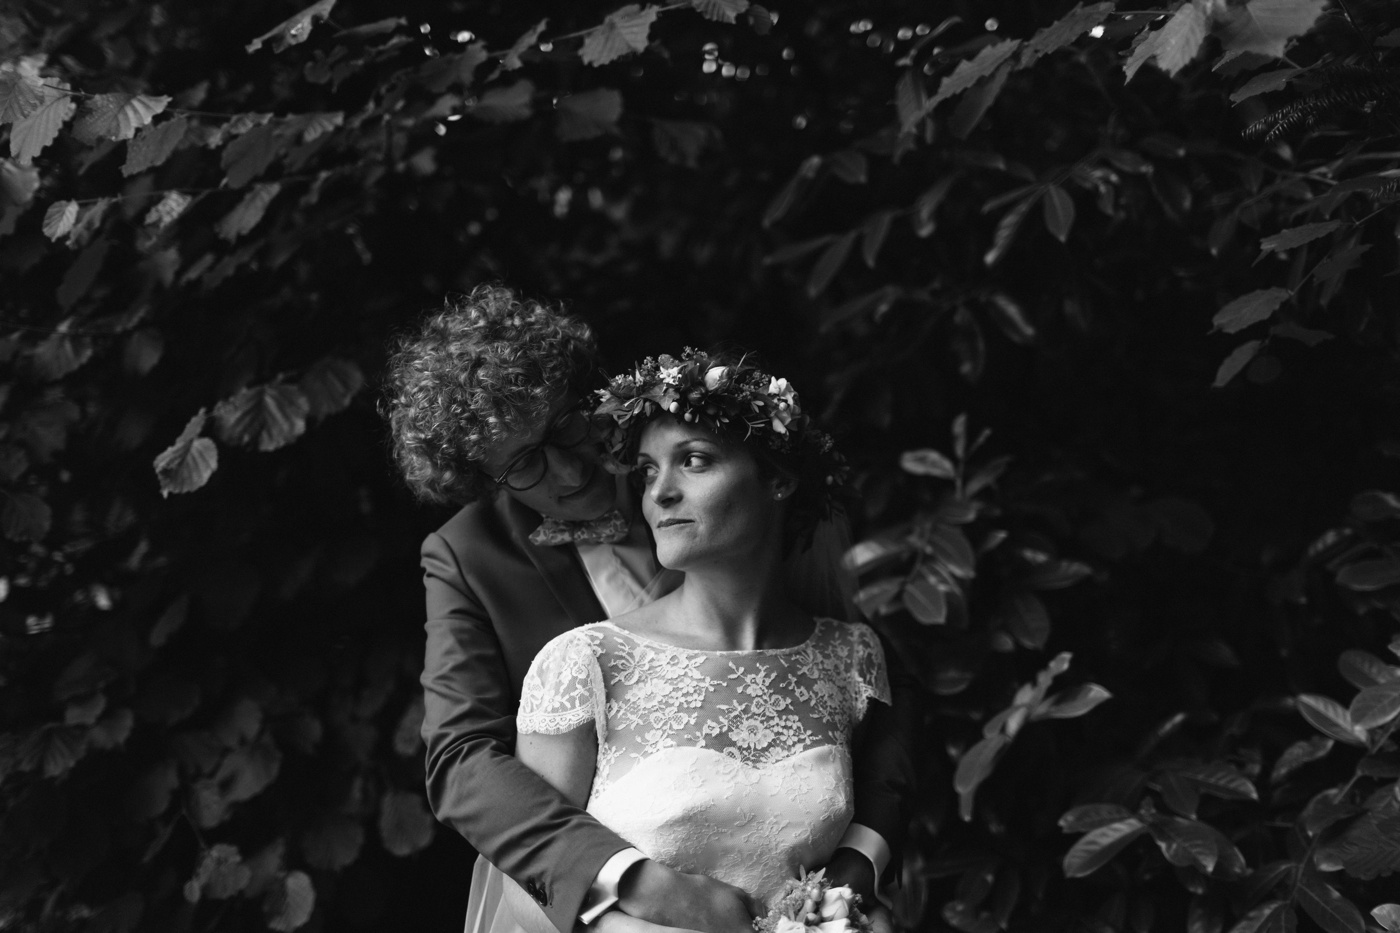 Normandy France Countryside Wedding by Megan Saul